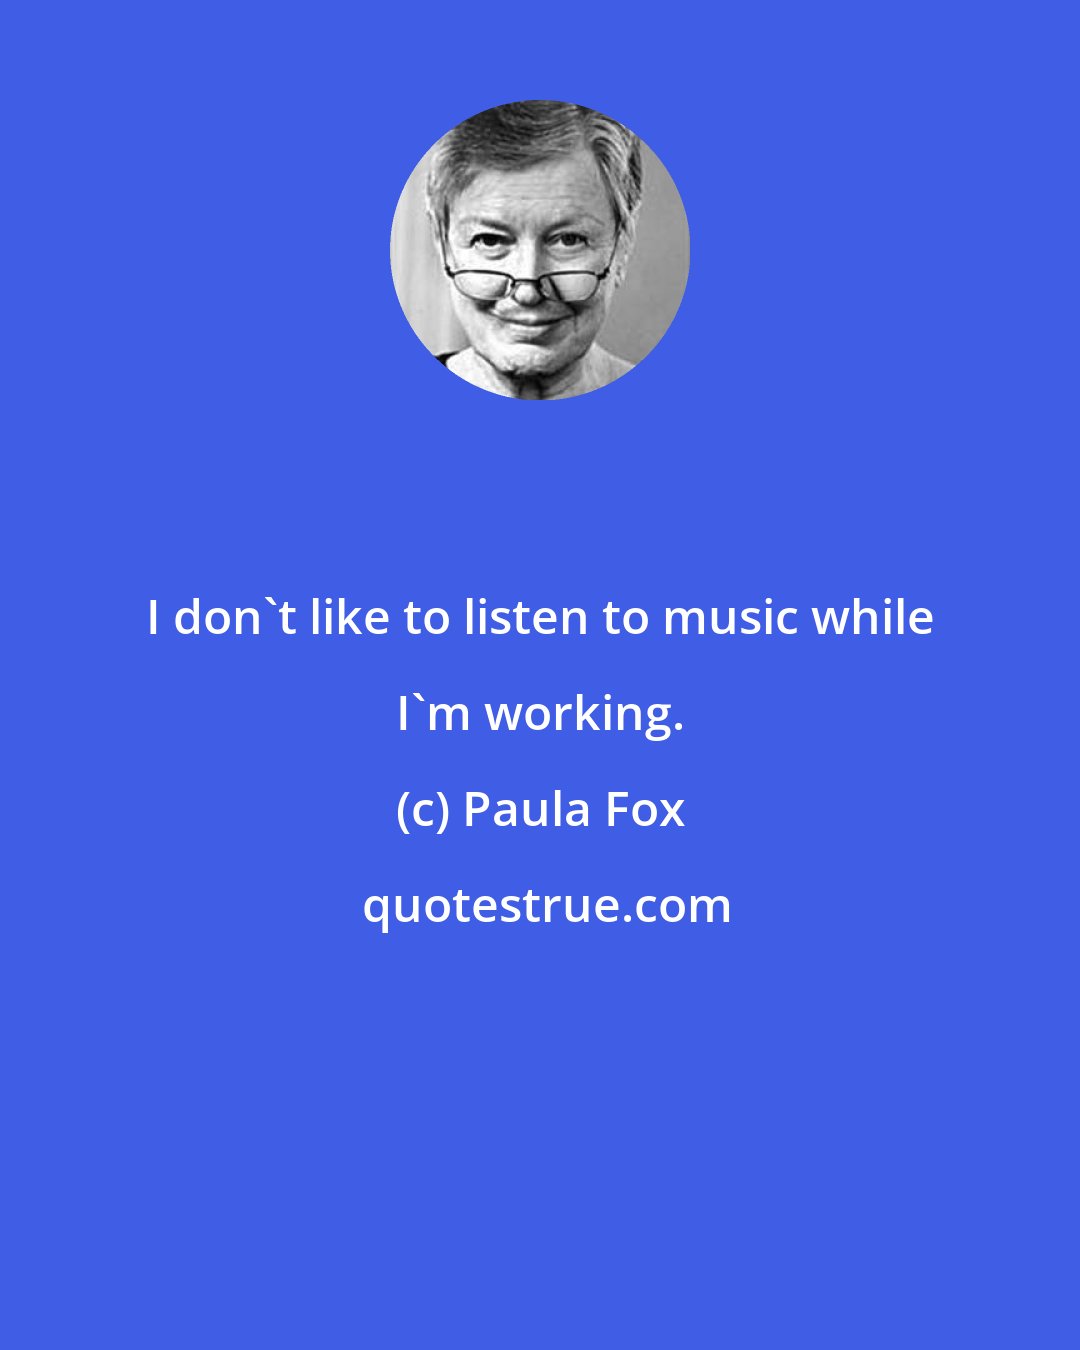 Paula Fox: I don't like to listen to music while I'm working.